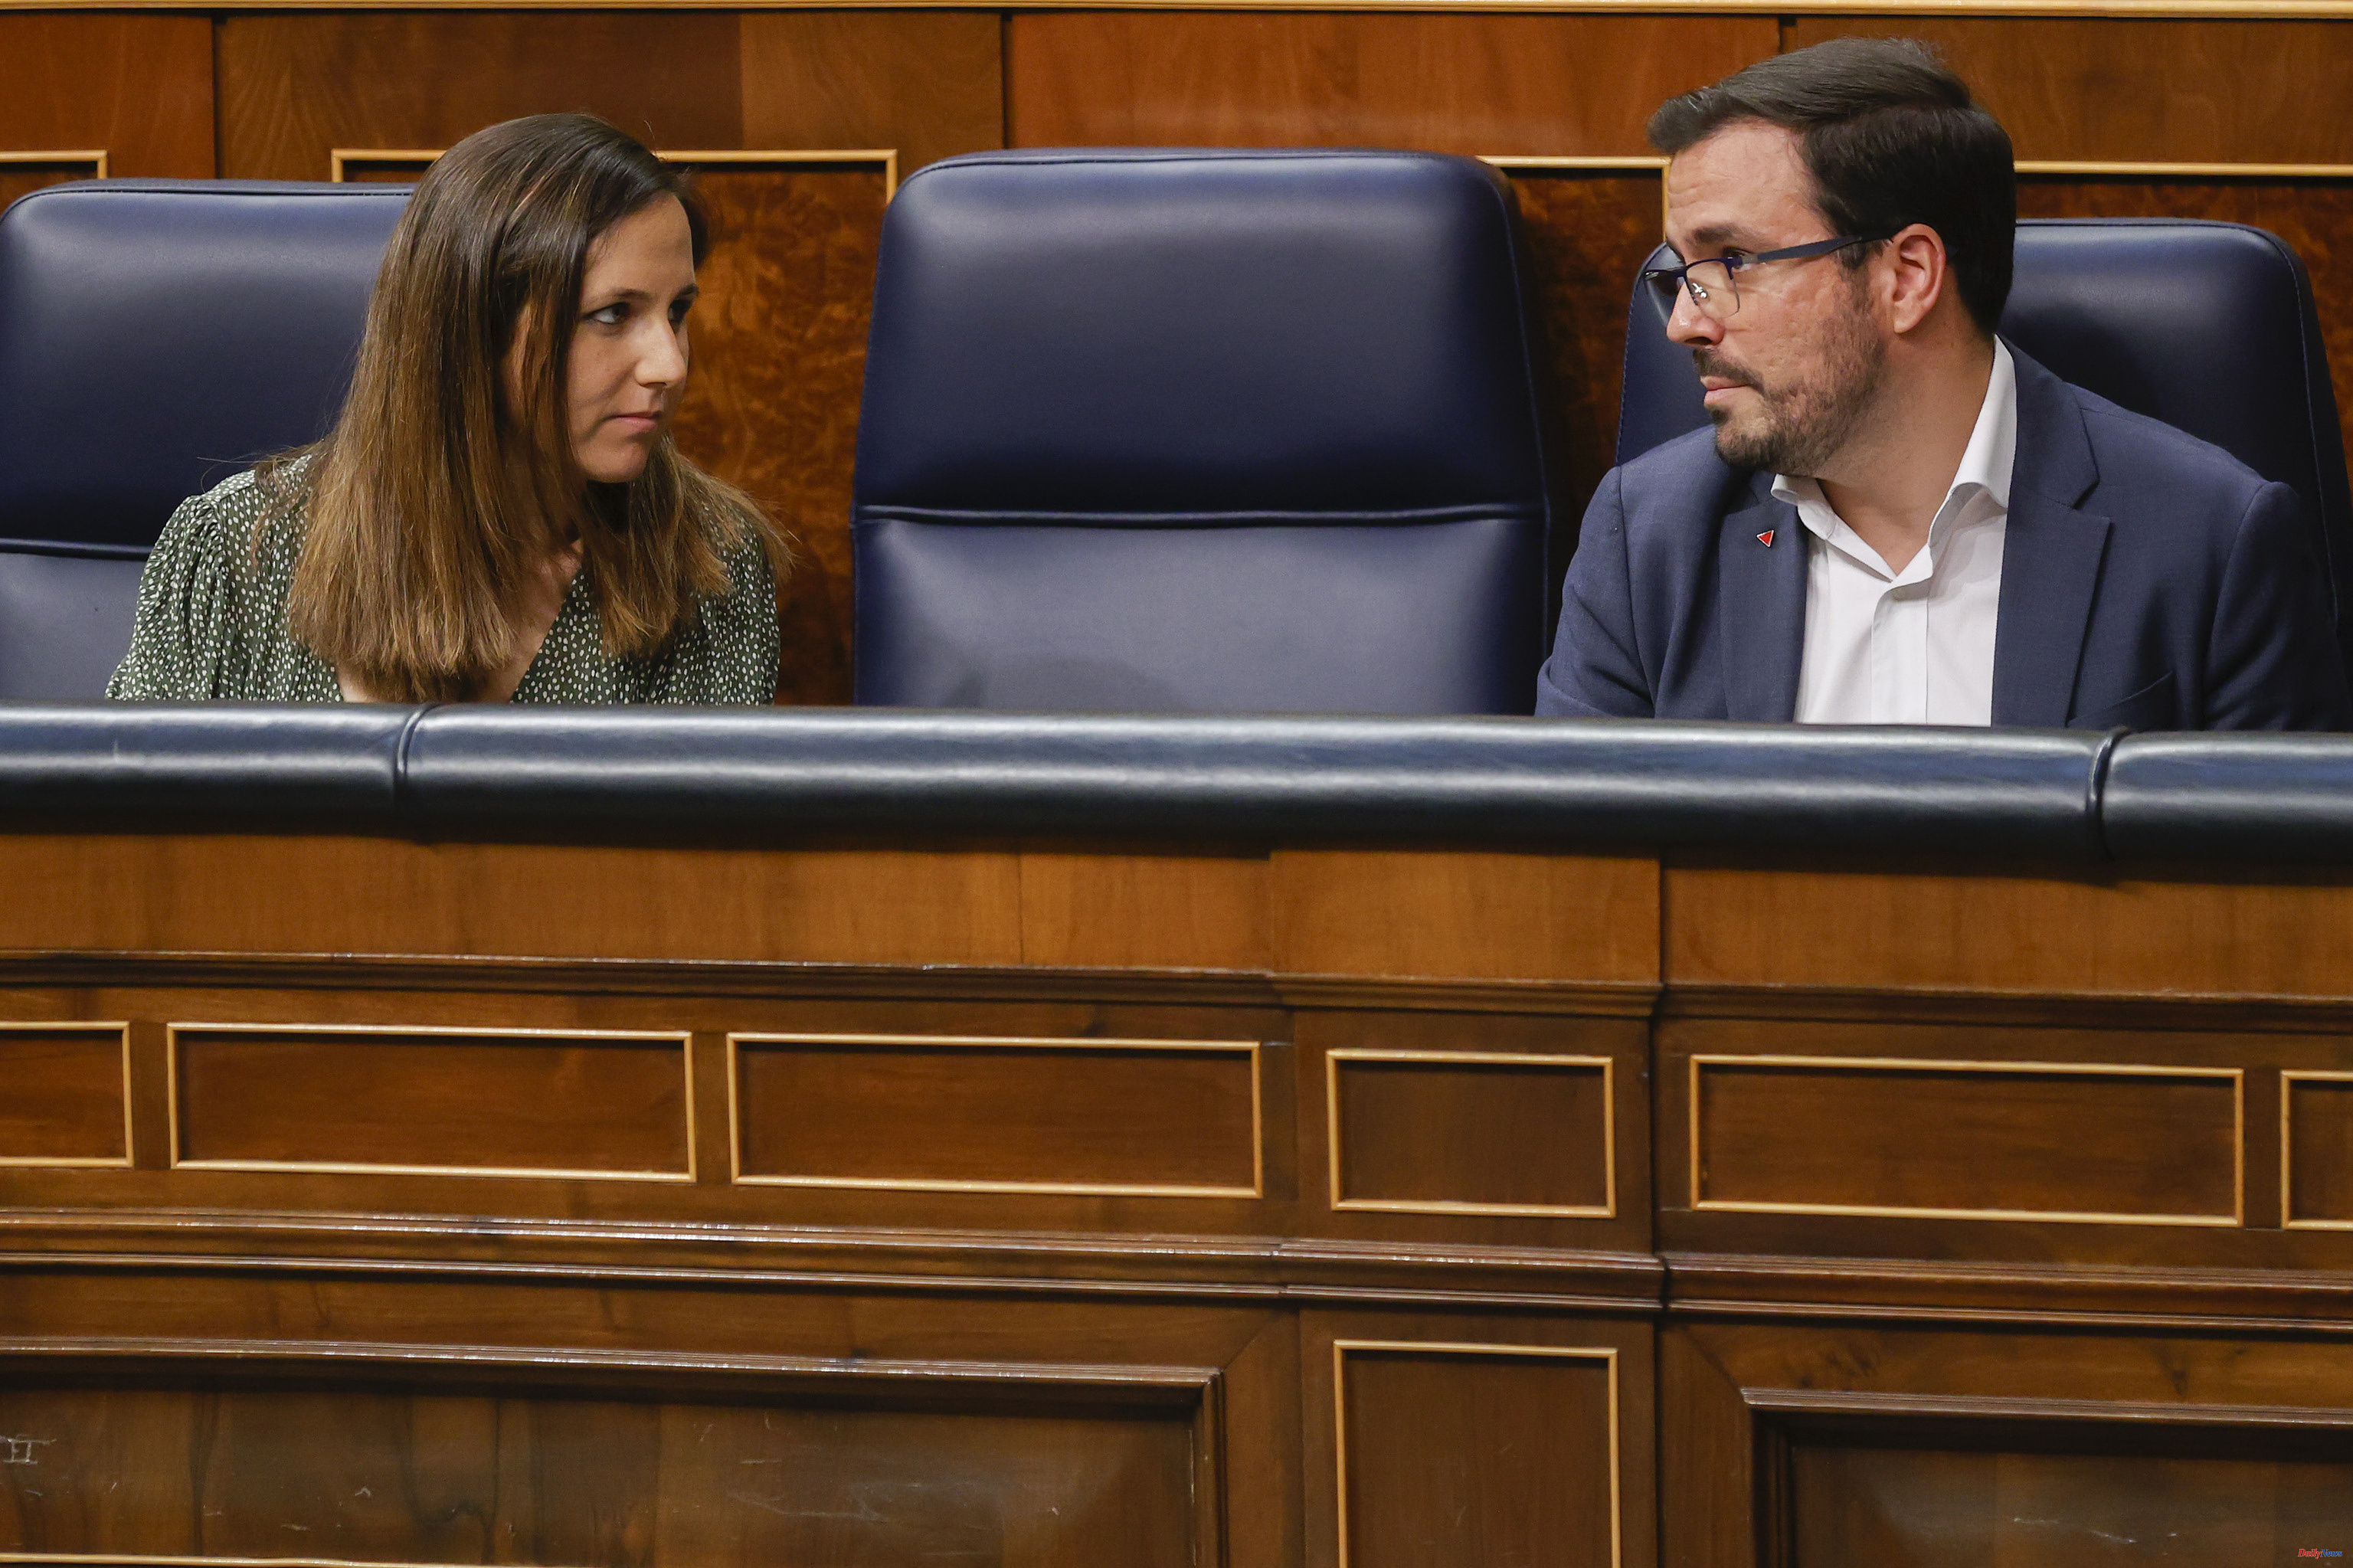 Consumption Podemos buries Garzón's campaign against meat and is now betting on subsidizing its consumption in the supermarket